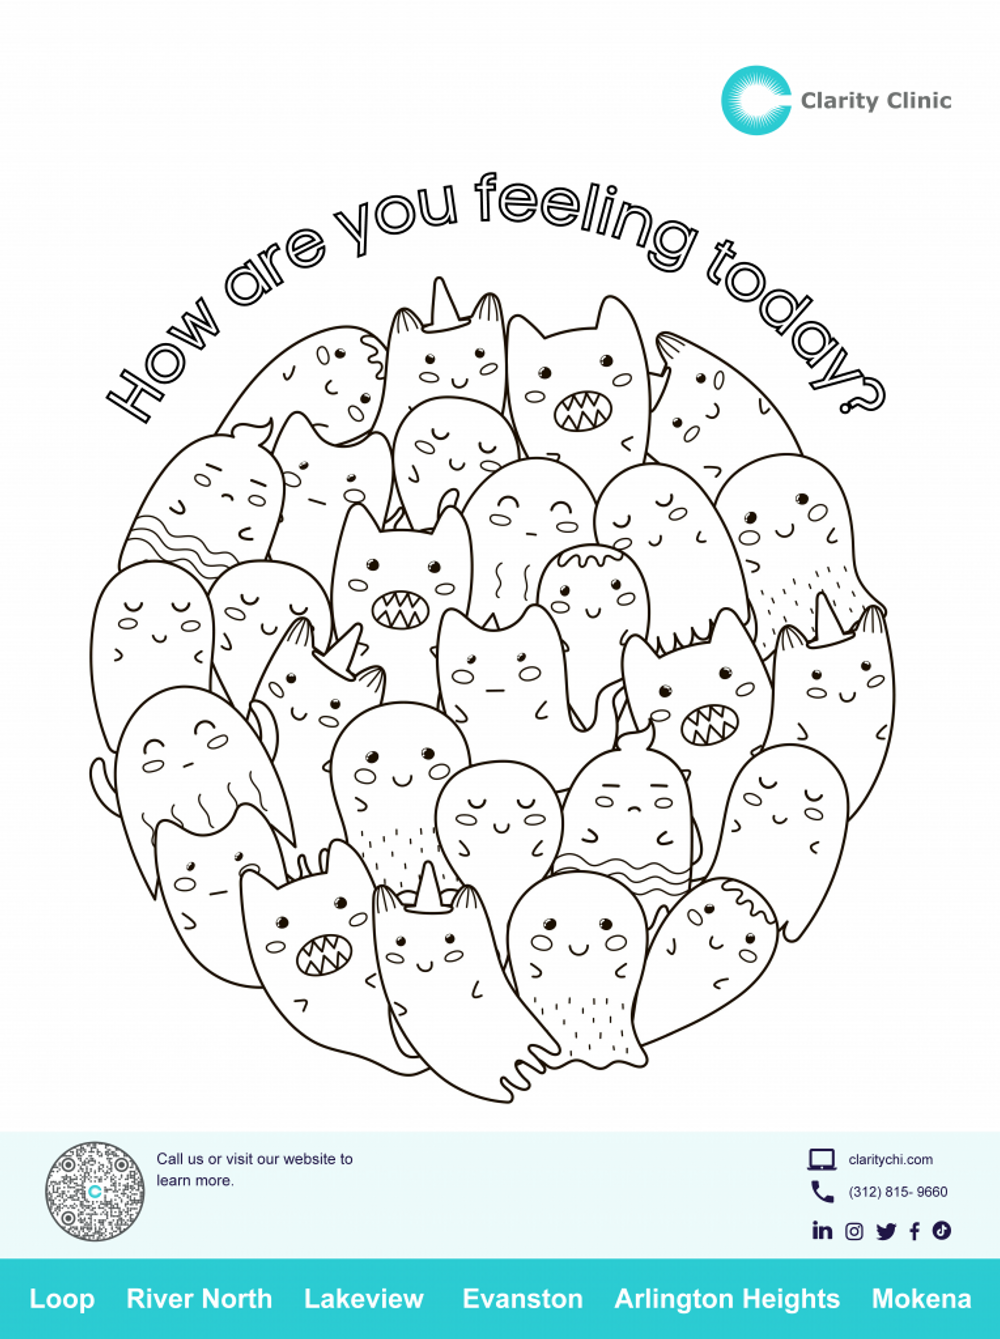 Clarity Clinic Coloring Sheet - How are you feeling today?